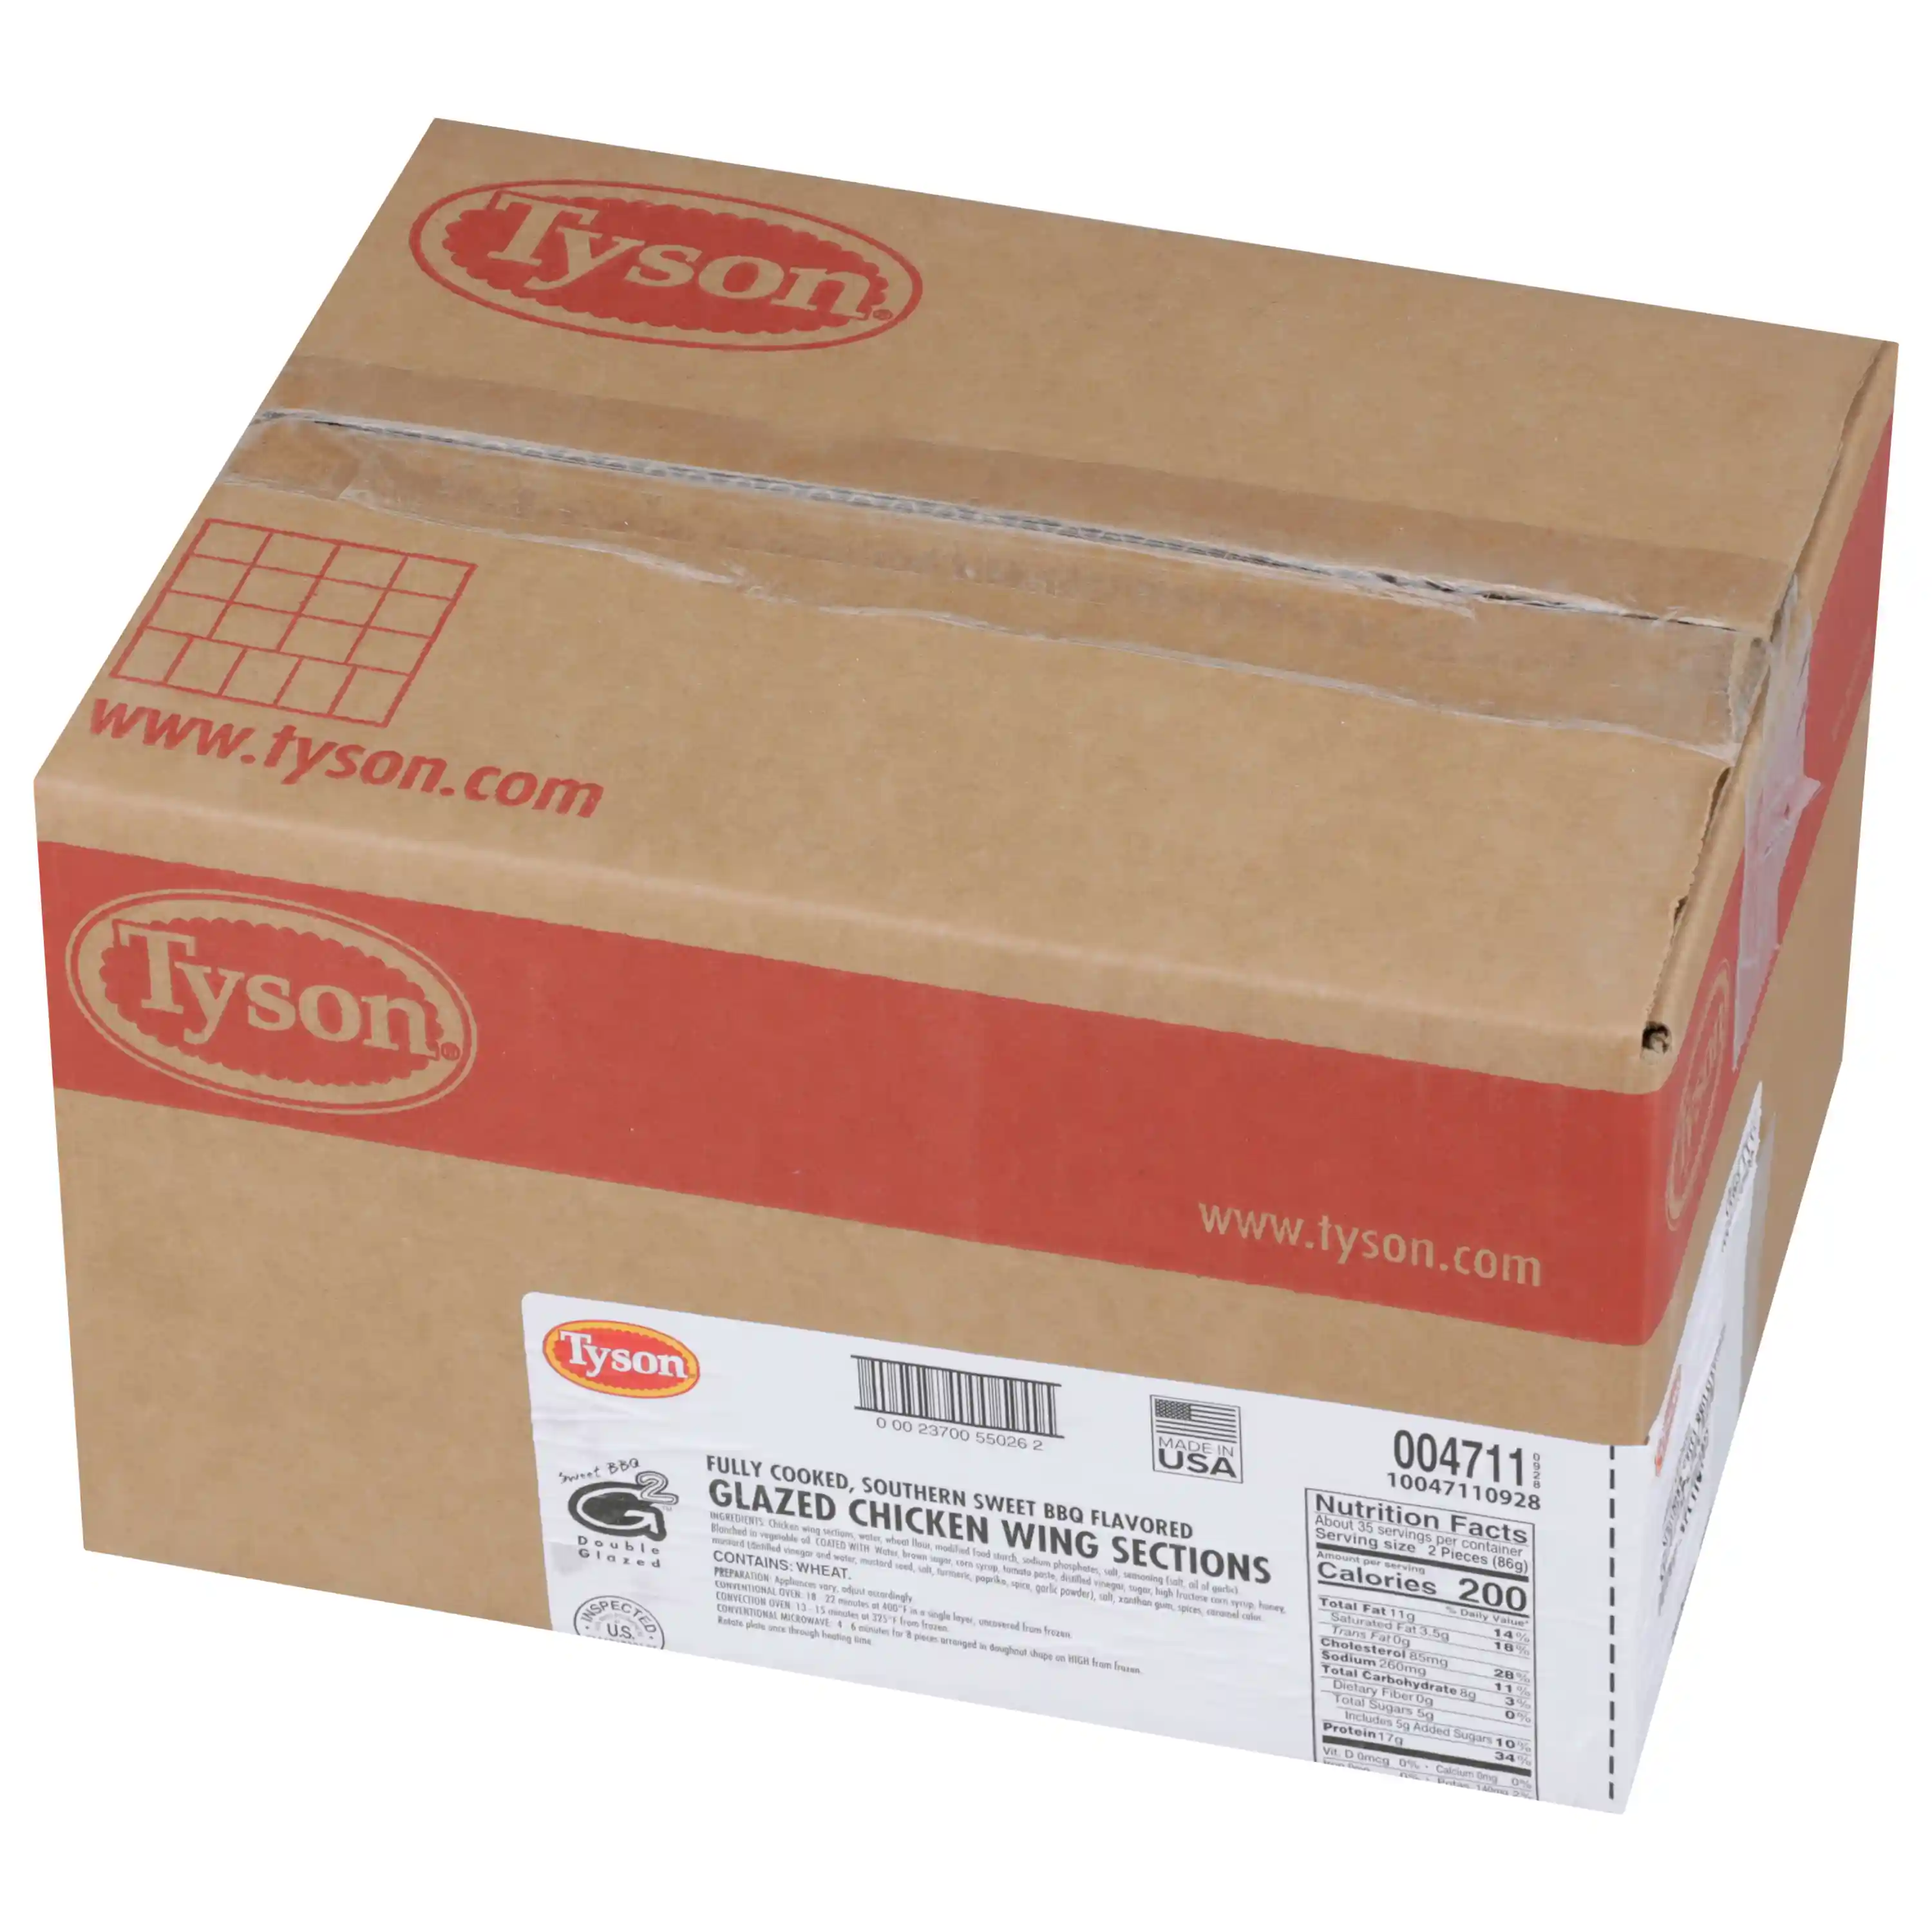 Tyson® Fully Cooked Southern Sweet BBQ Glazed Bone-In Chicken Wing Sections, Large_image_31